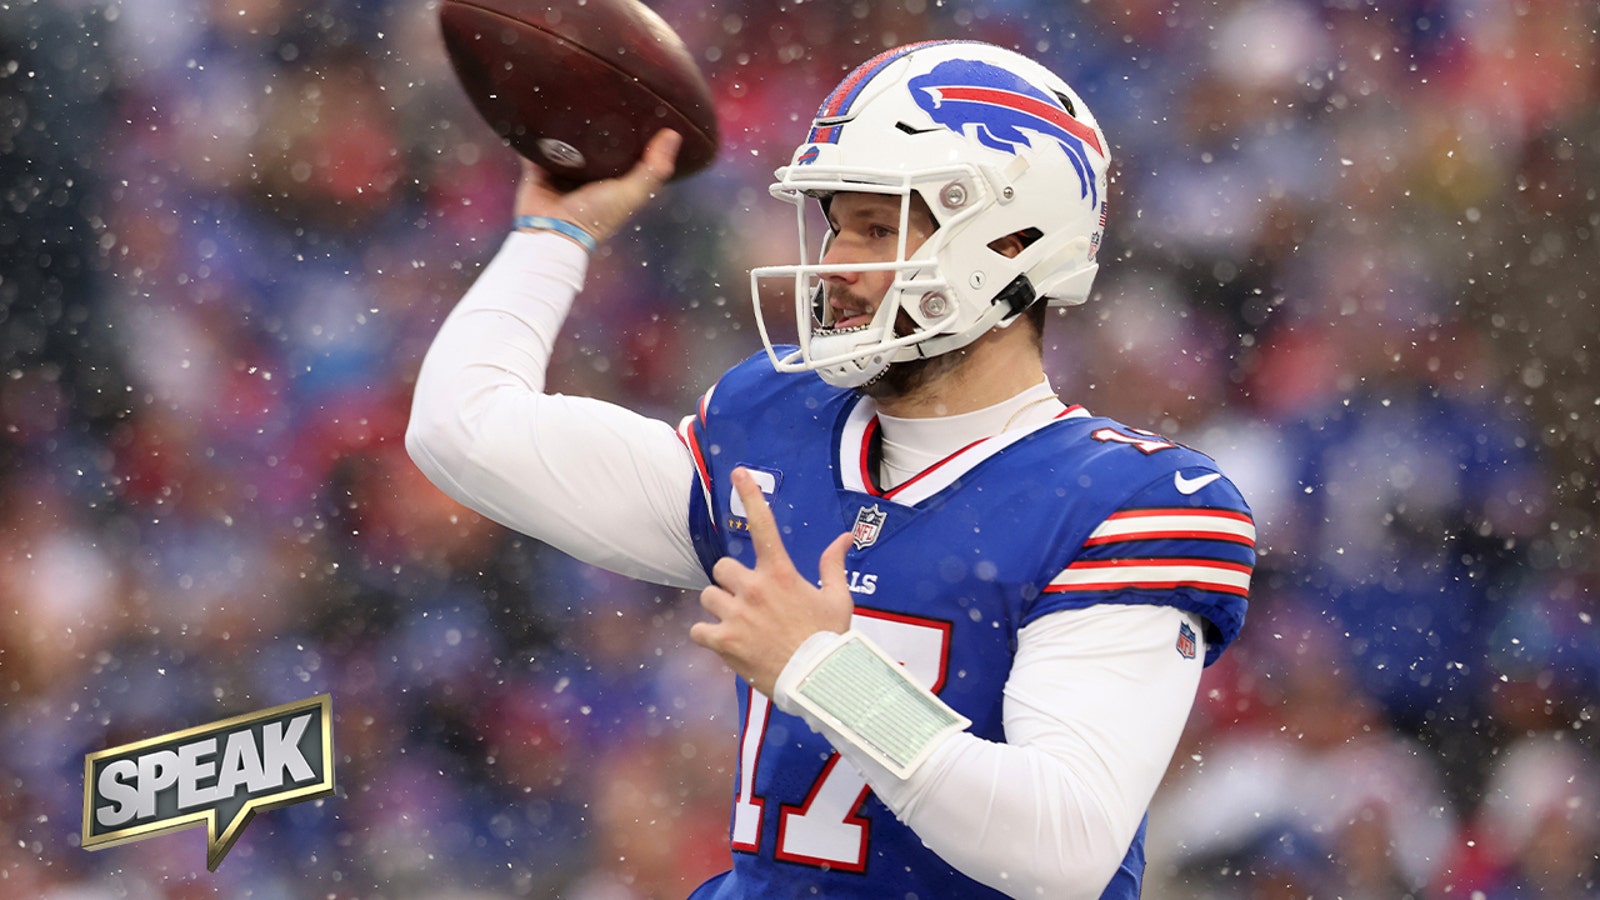 Does Josh Allen catch a pass for his game against the Bengals?